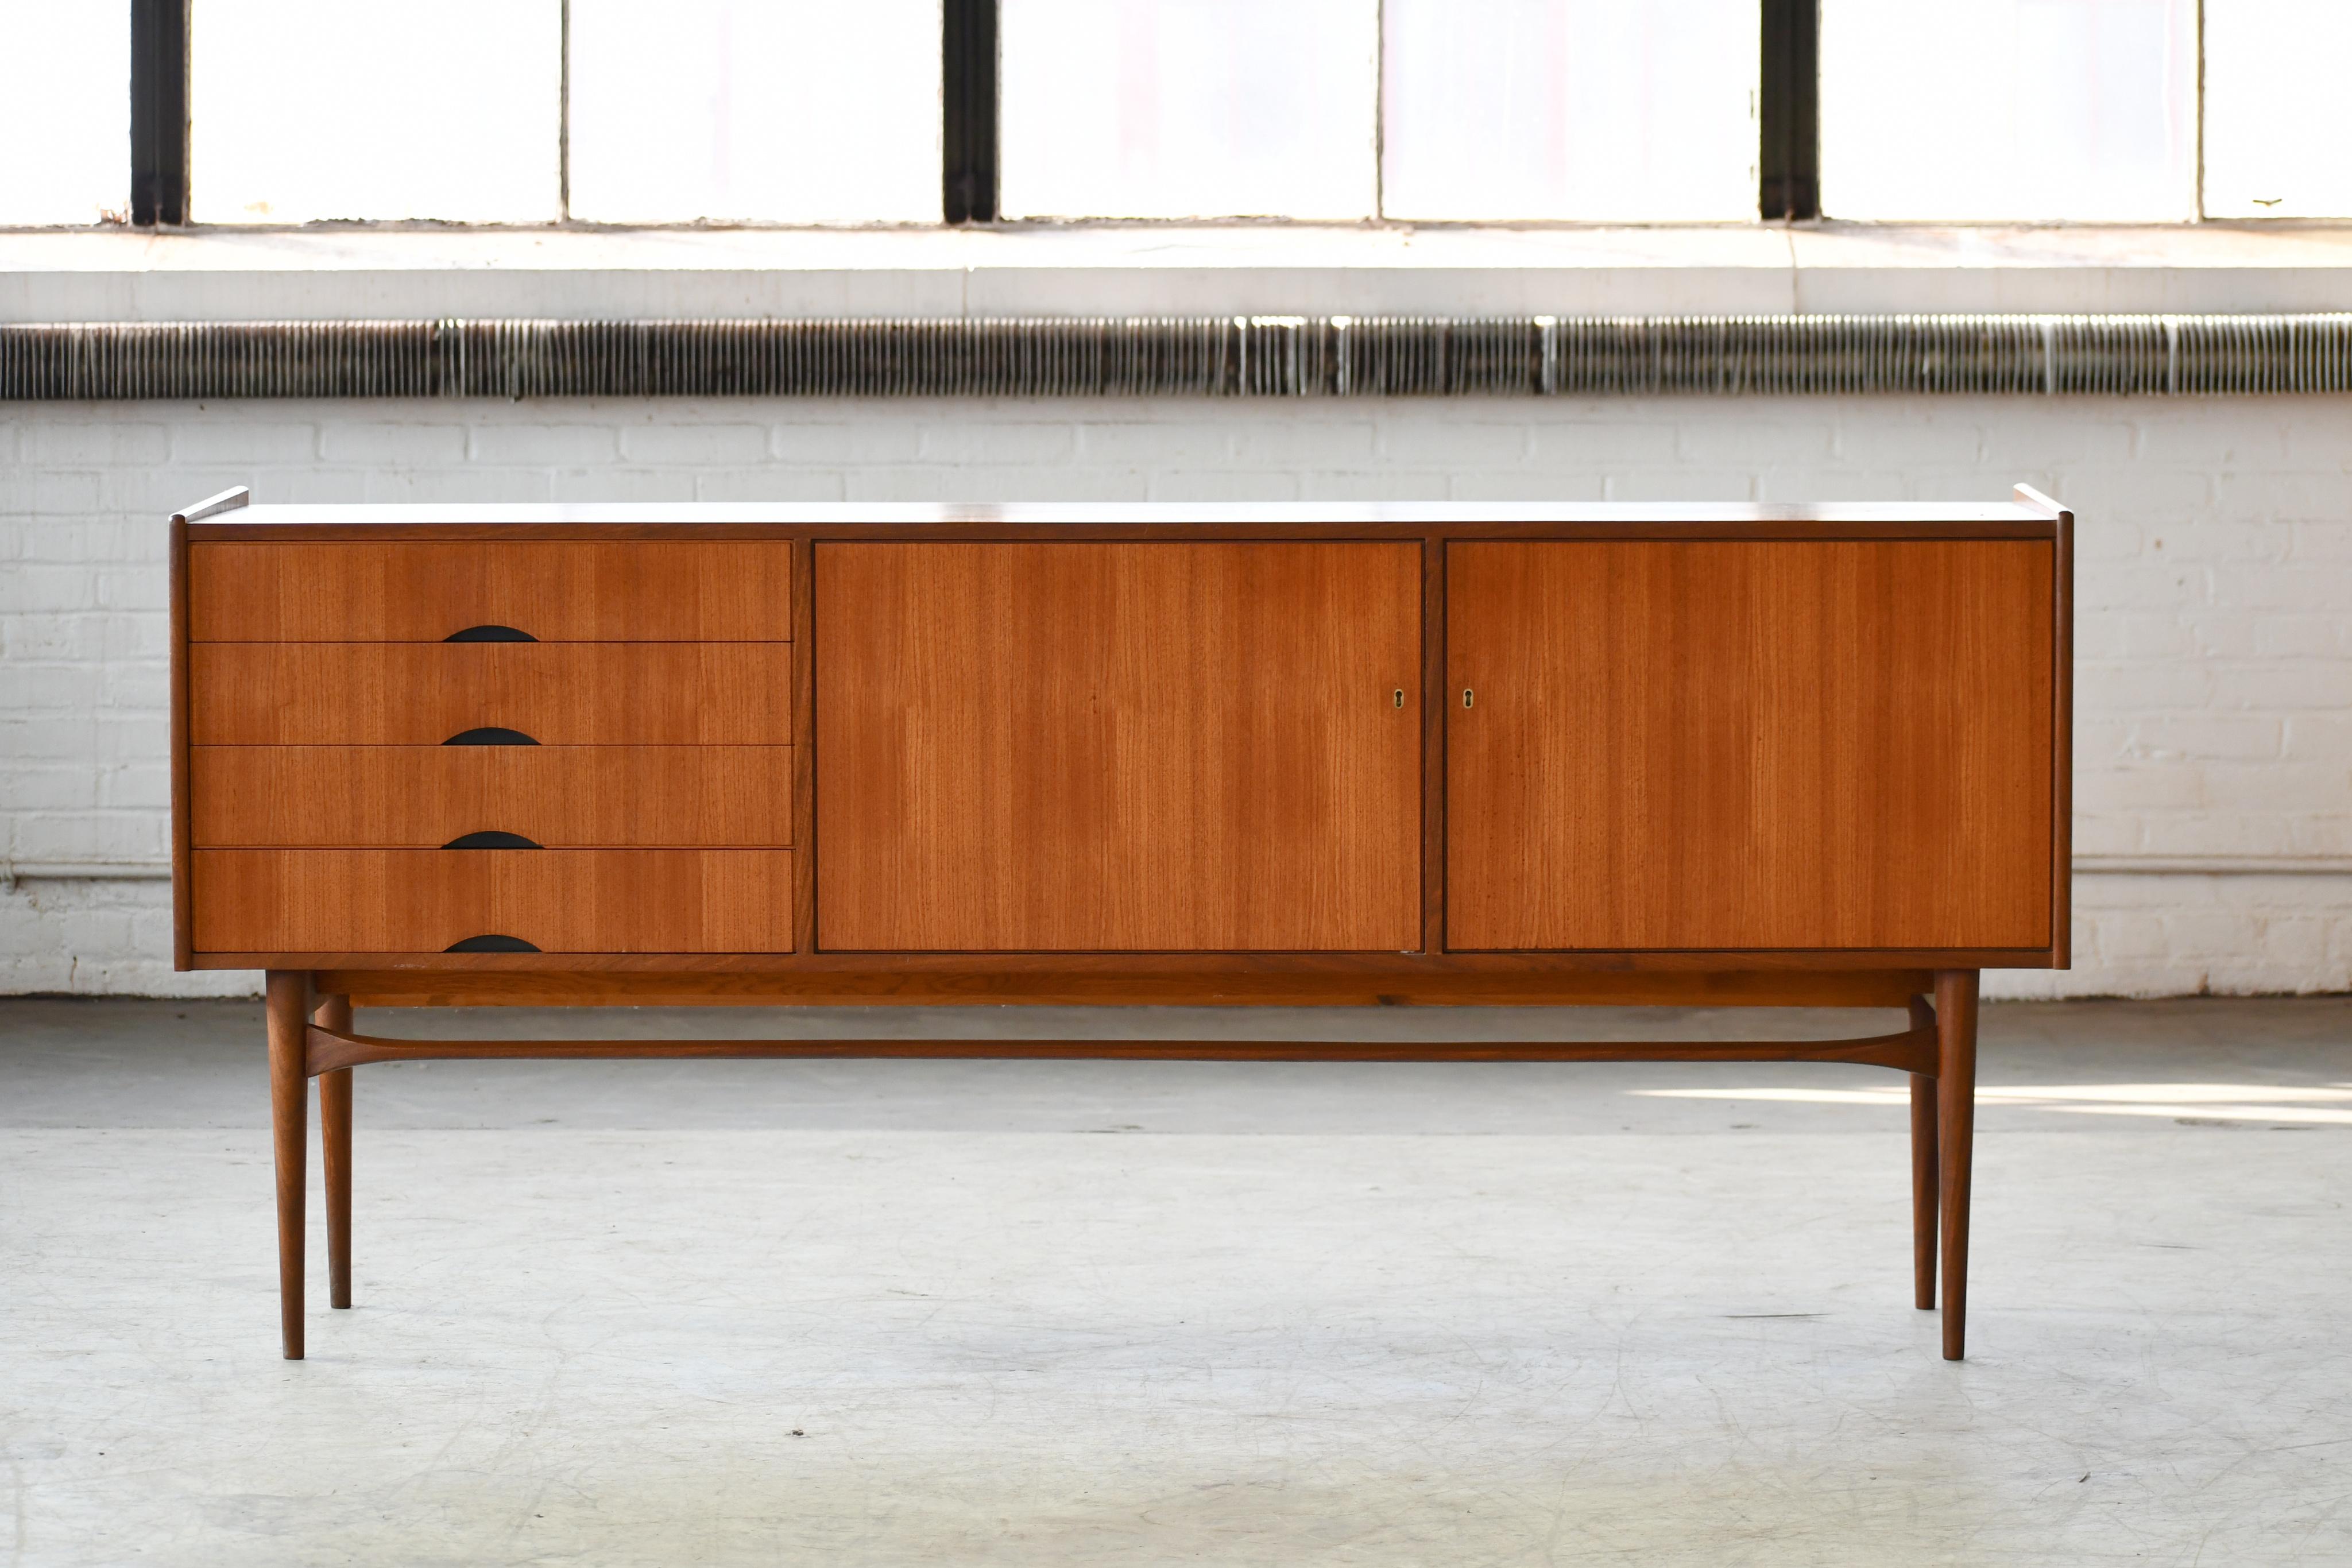 Beautiful Danish midcentury low sideboard in teak made in 1960s. Nice off-center drawer section with room for cutlery flanked by compartments with adjustable shelves behind nice book matched sliding doors with carved pulls. Raised on thin elegant